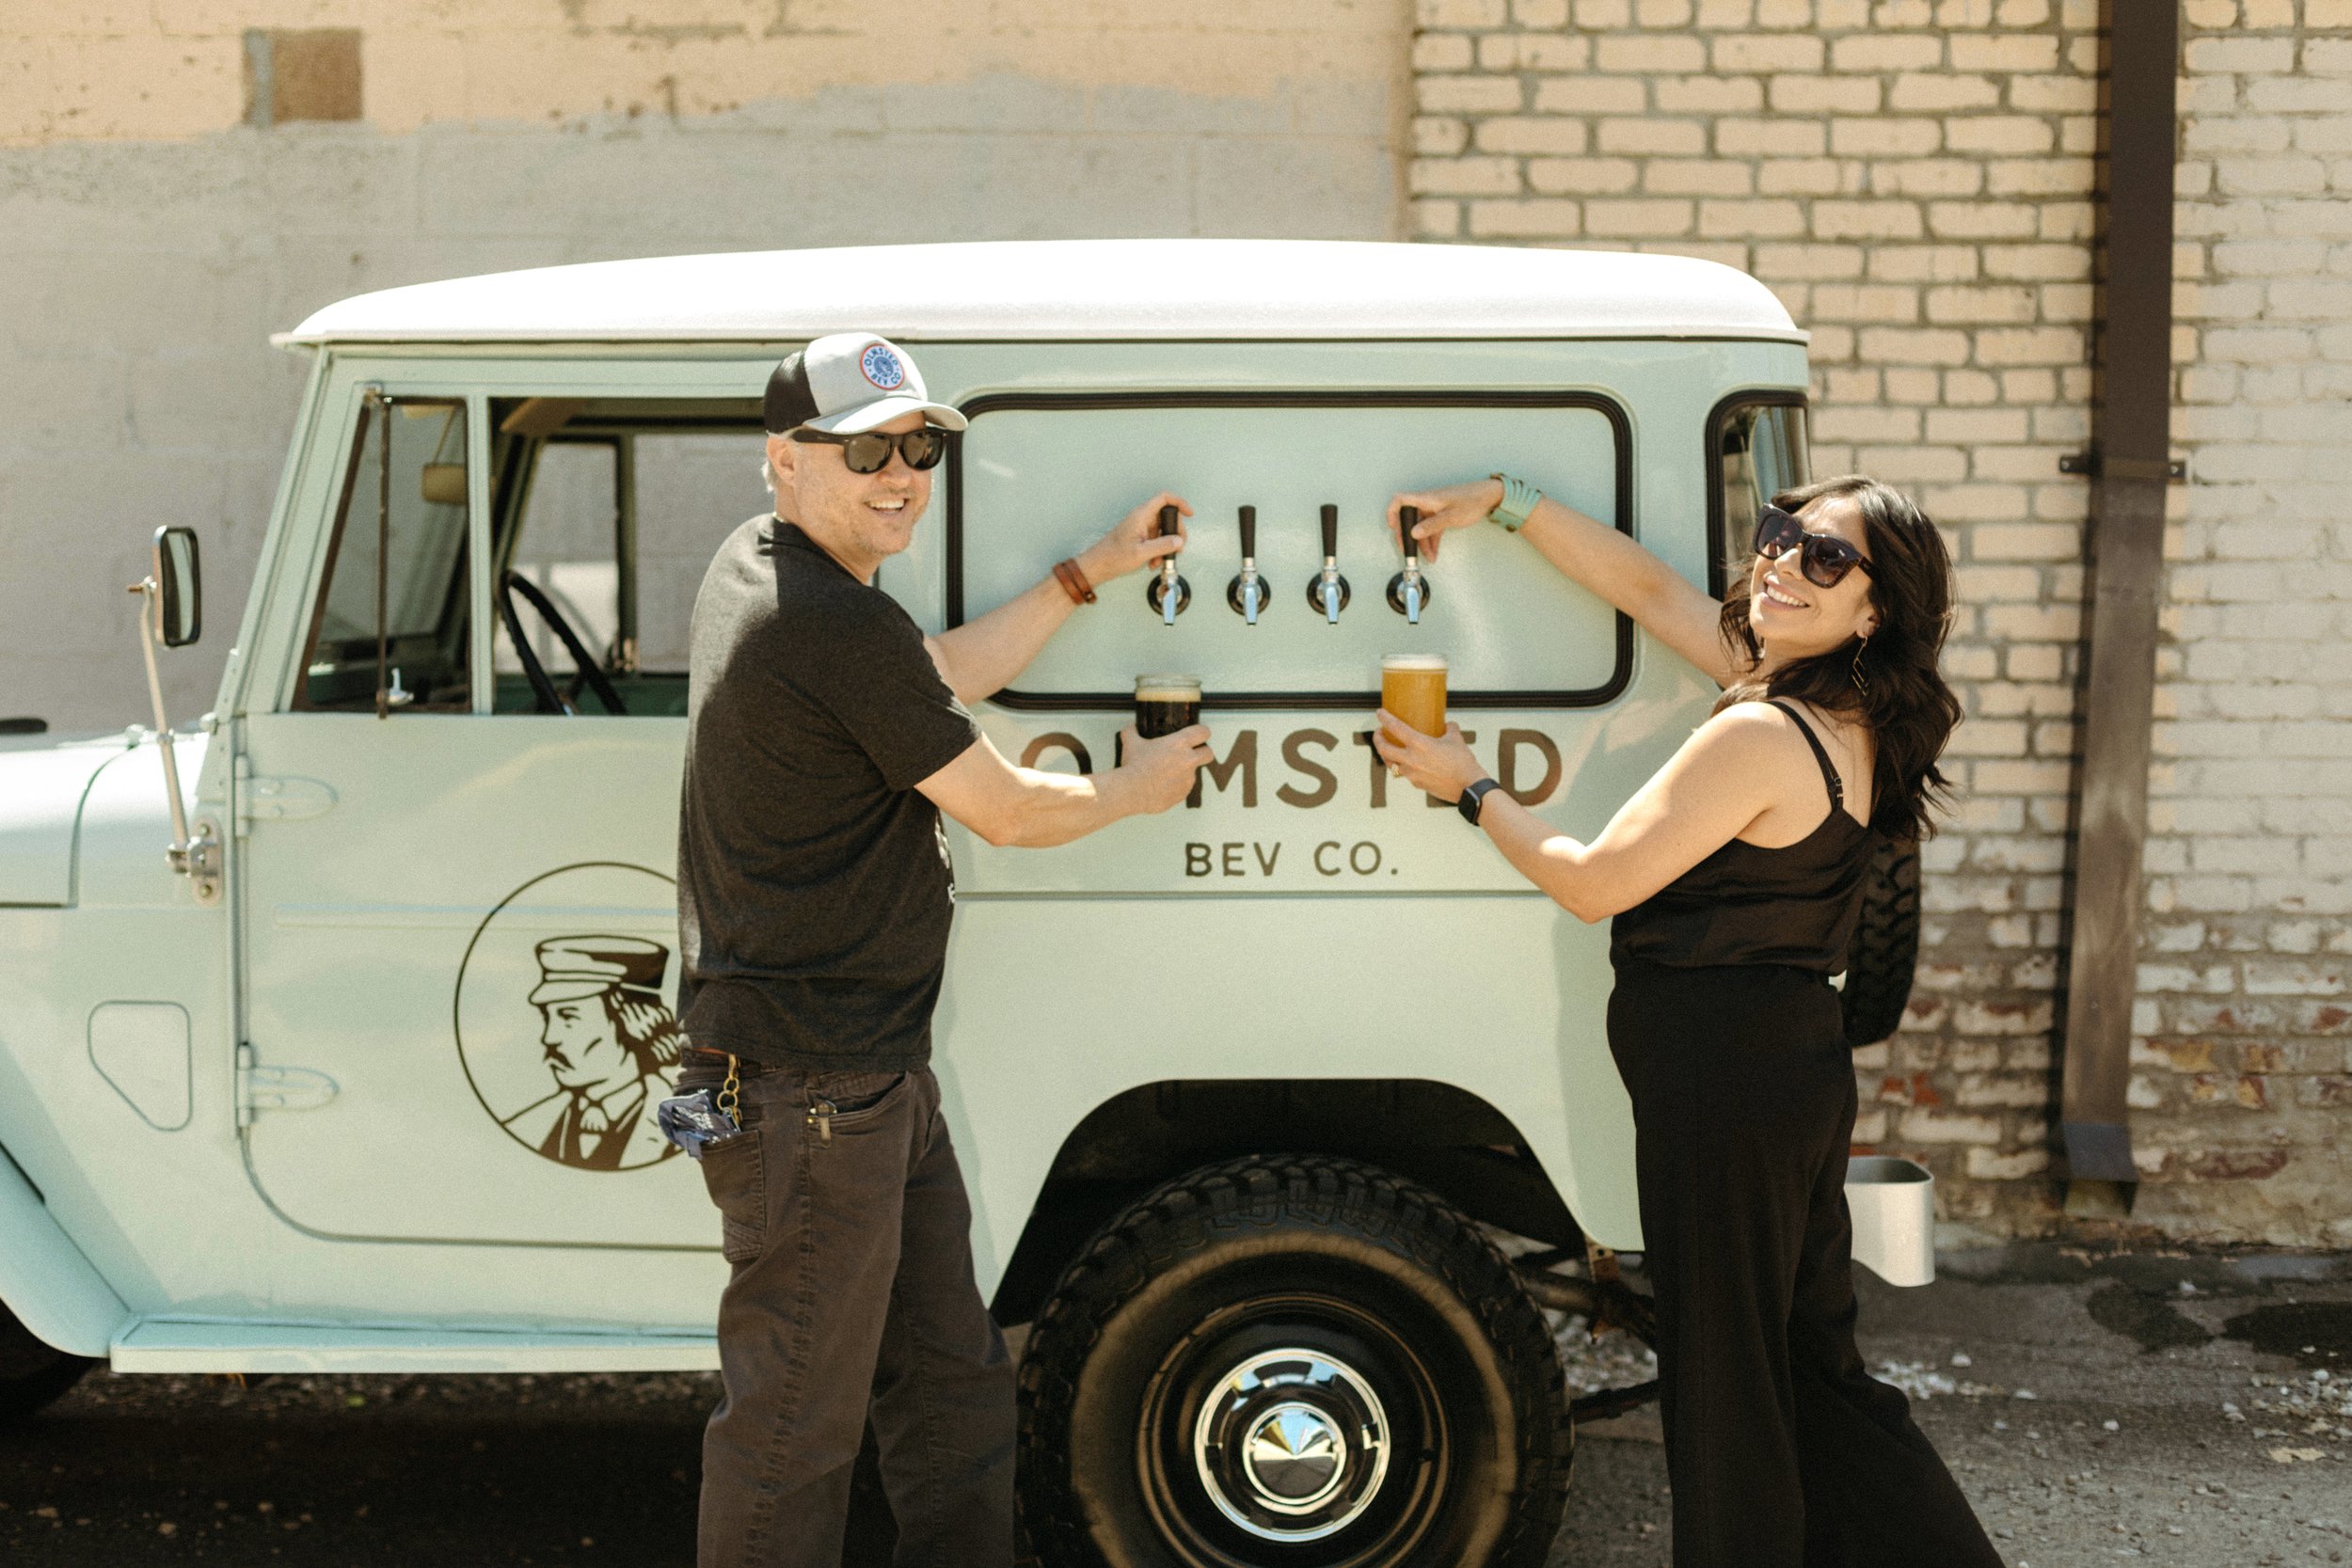 olsted-tap-truck-branding-session-knoxville-tori-lynne-photography-100.jpg